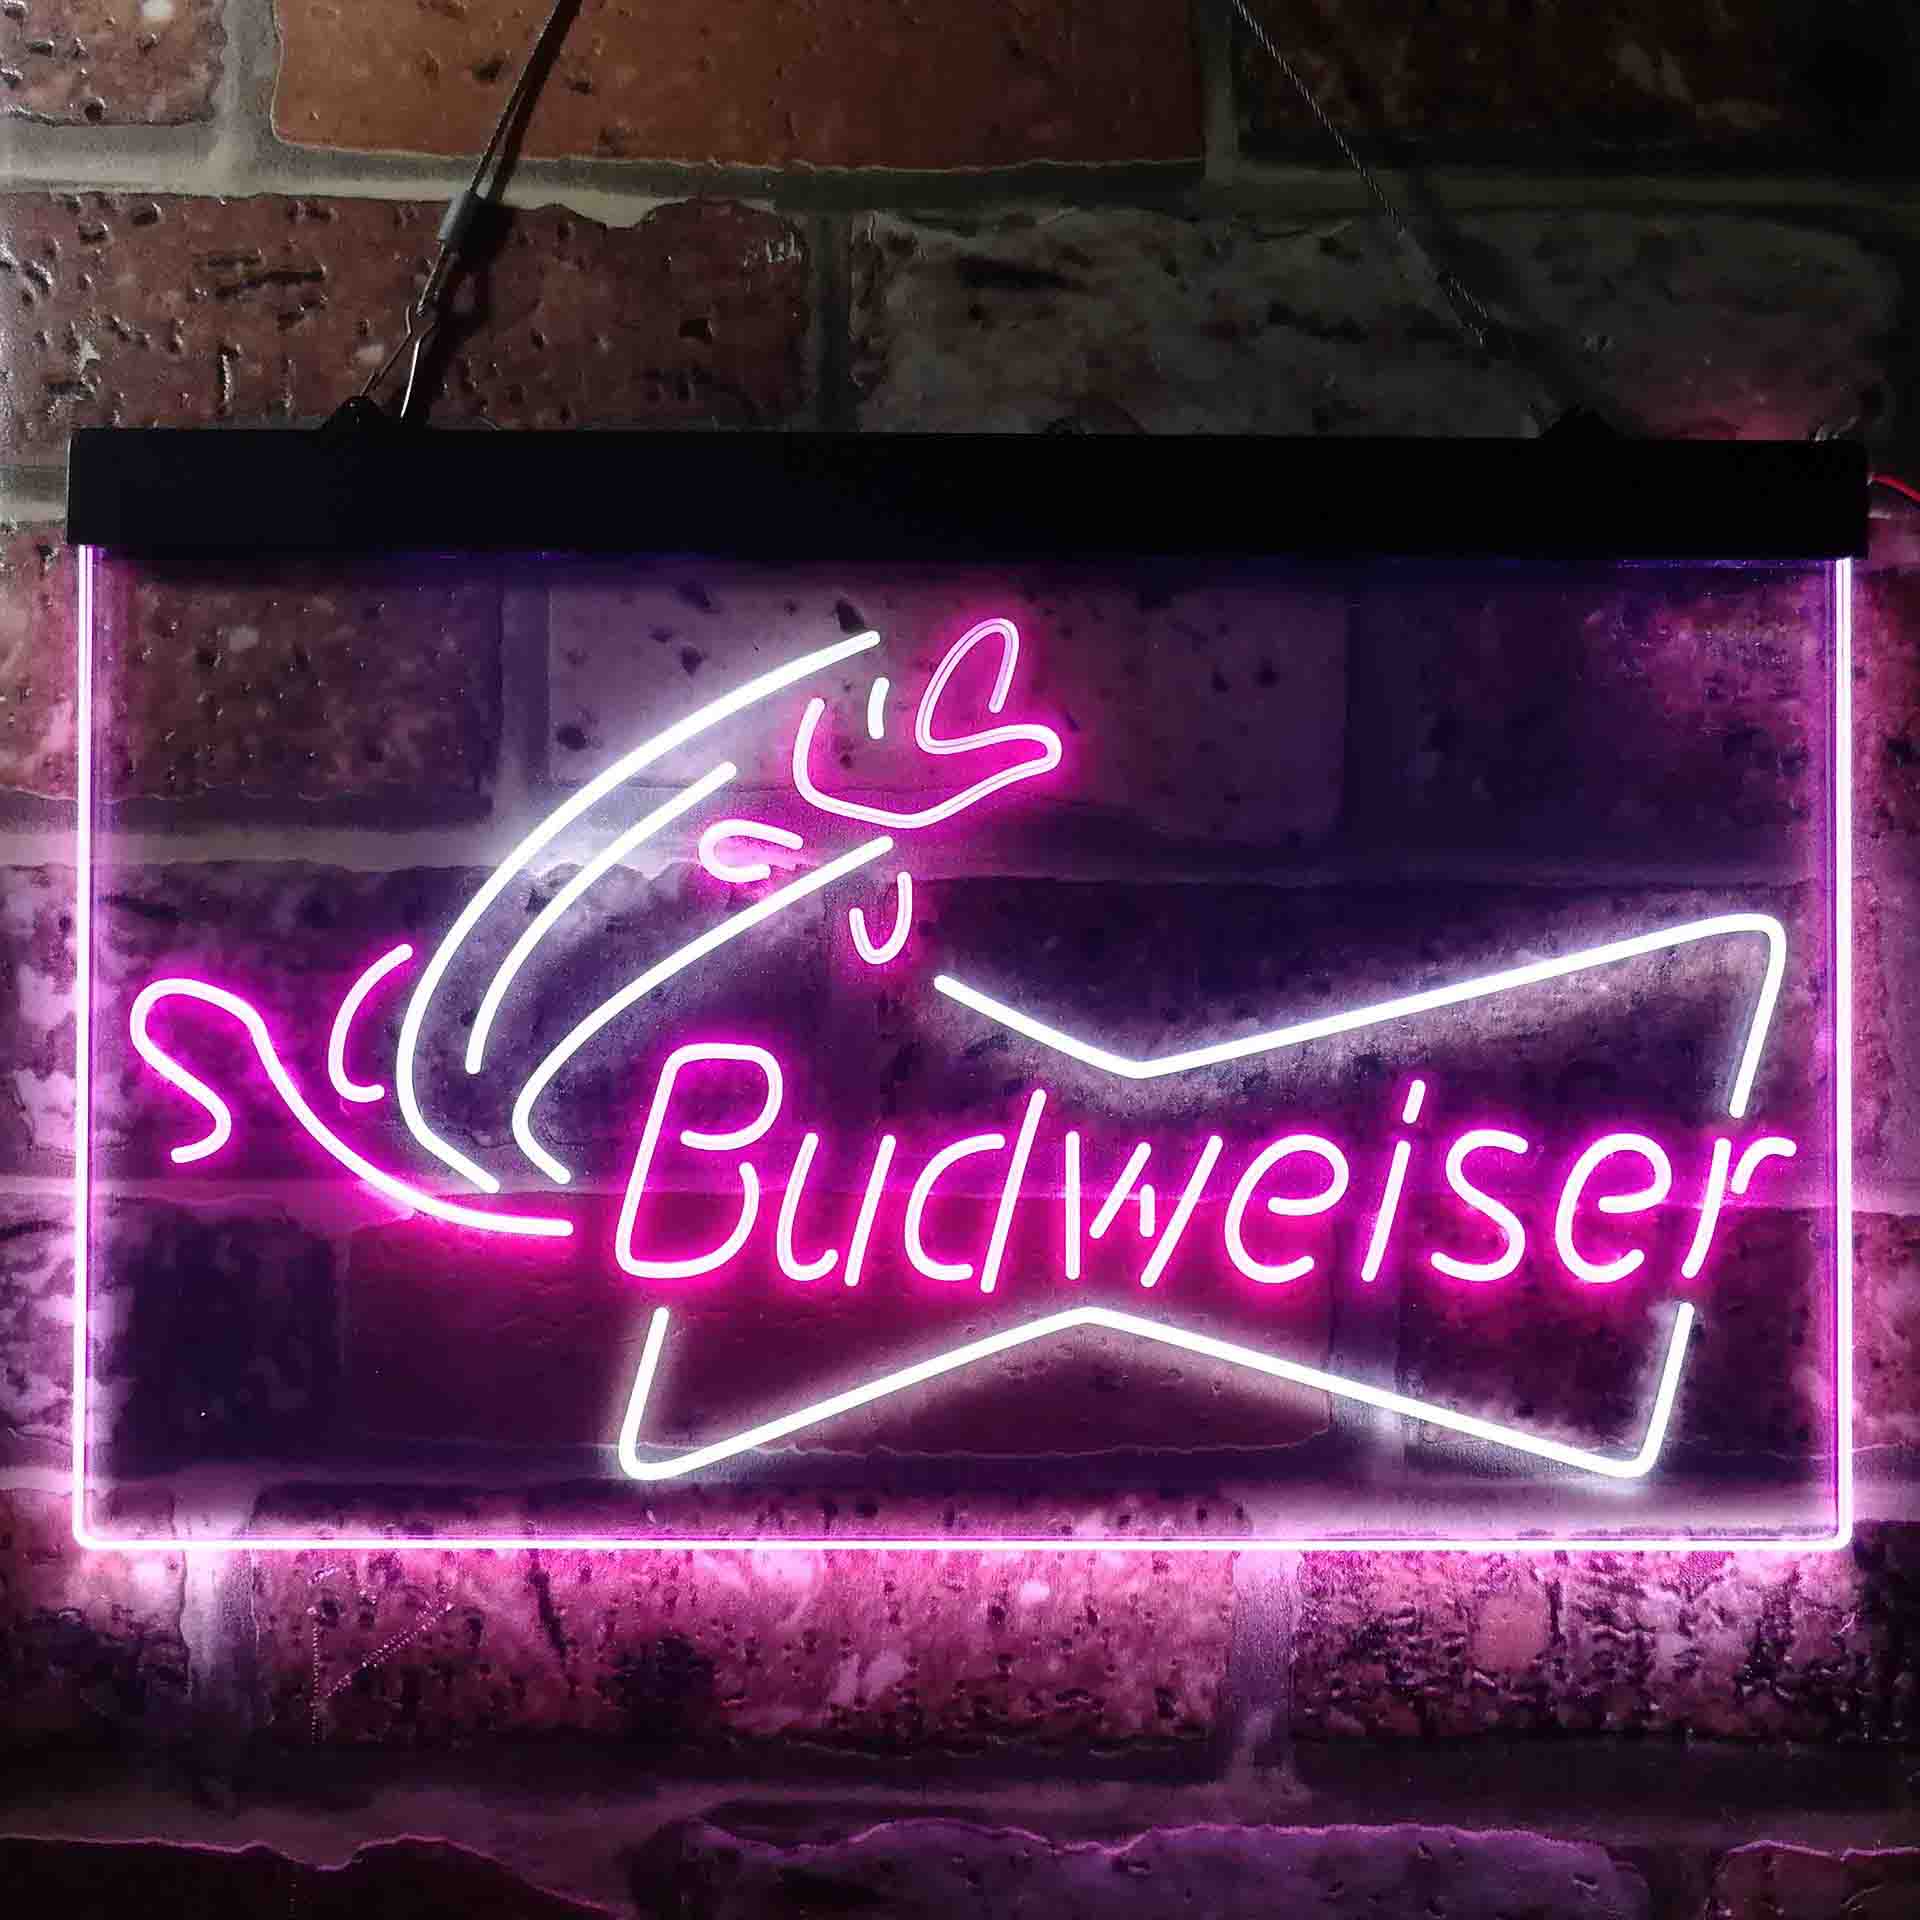 Budweiser Bow Tie Fishing Neon-Like LED Sign